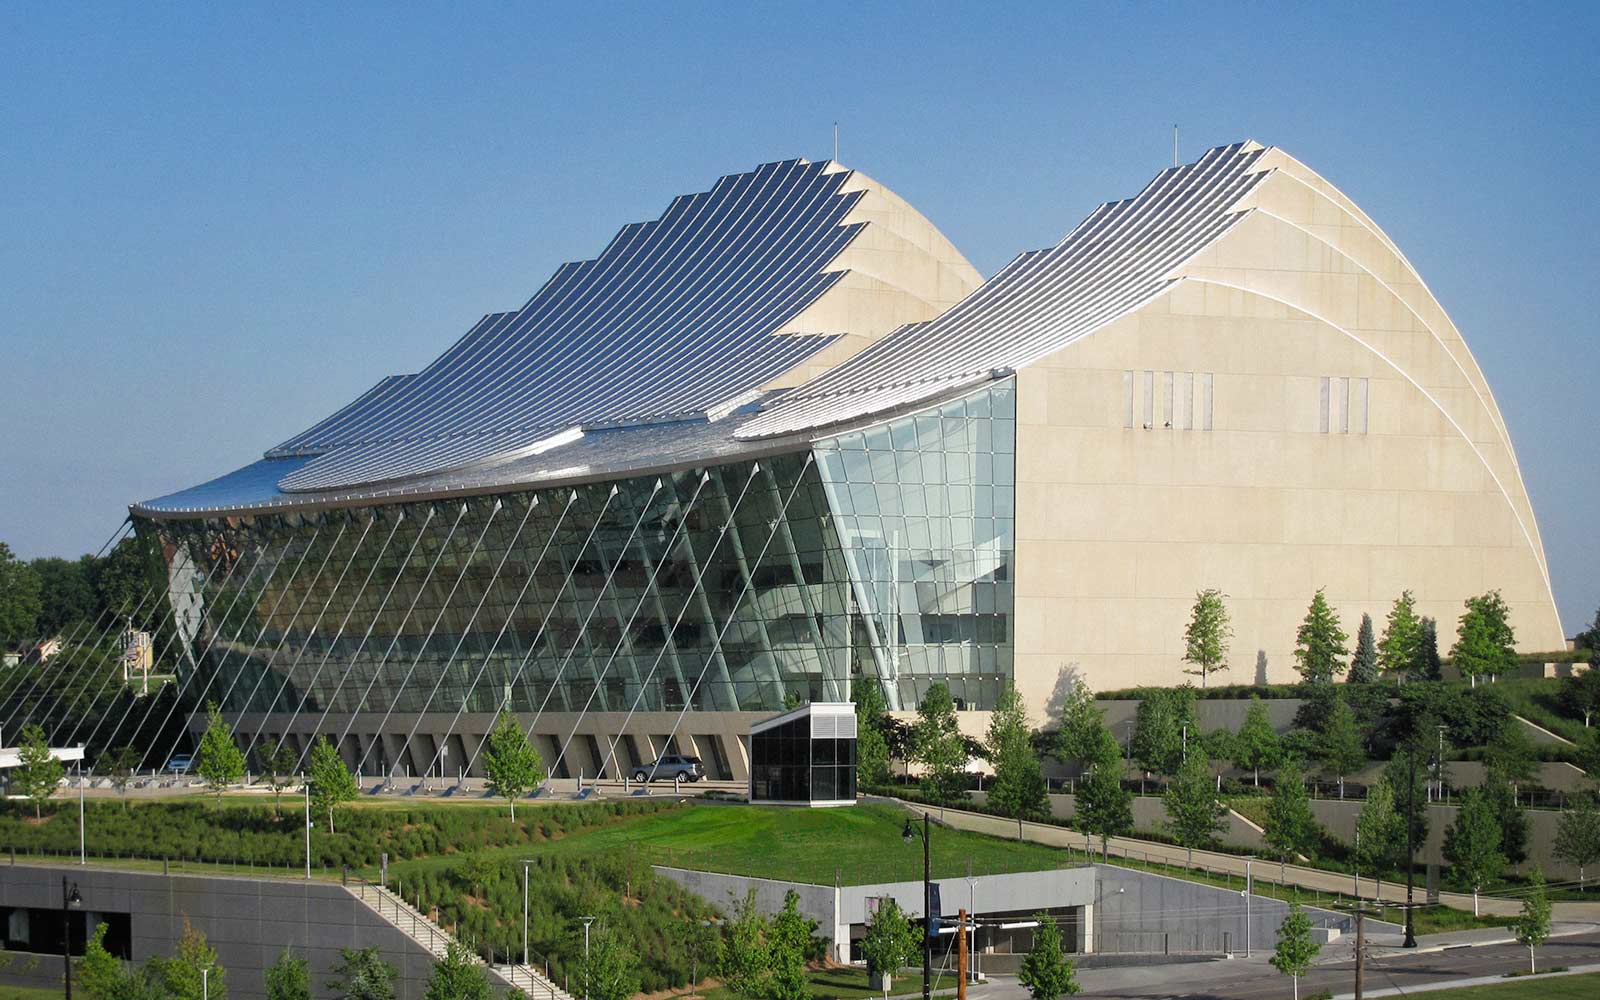 kaufmman center for the performing arts in kansas city